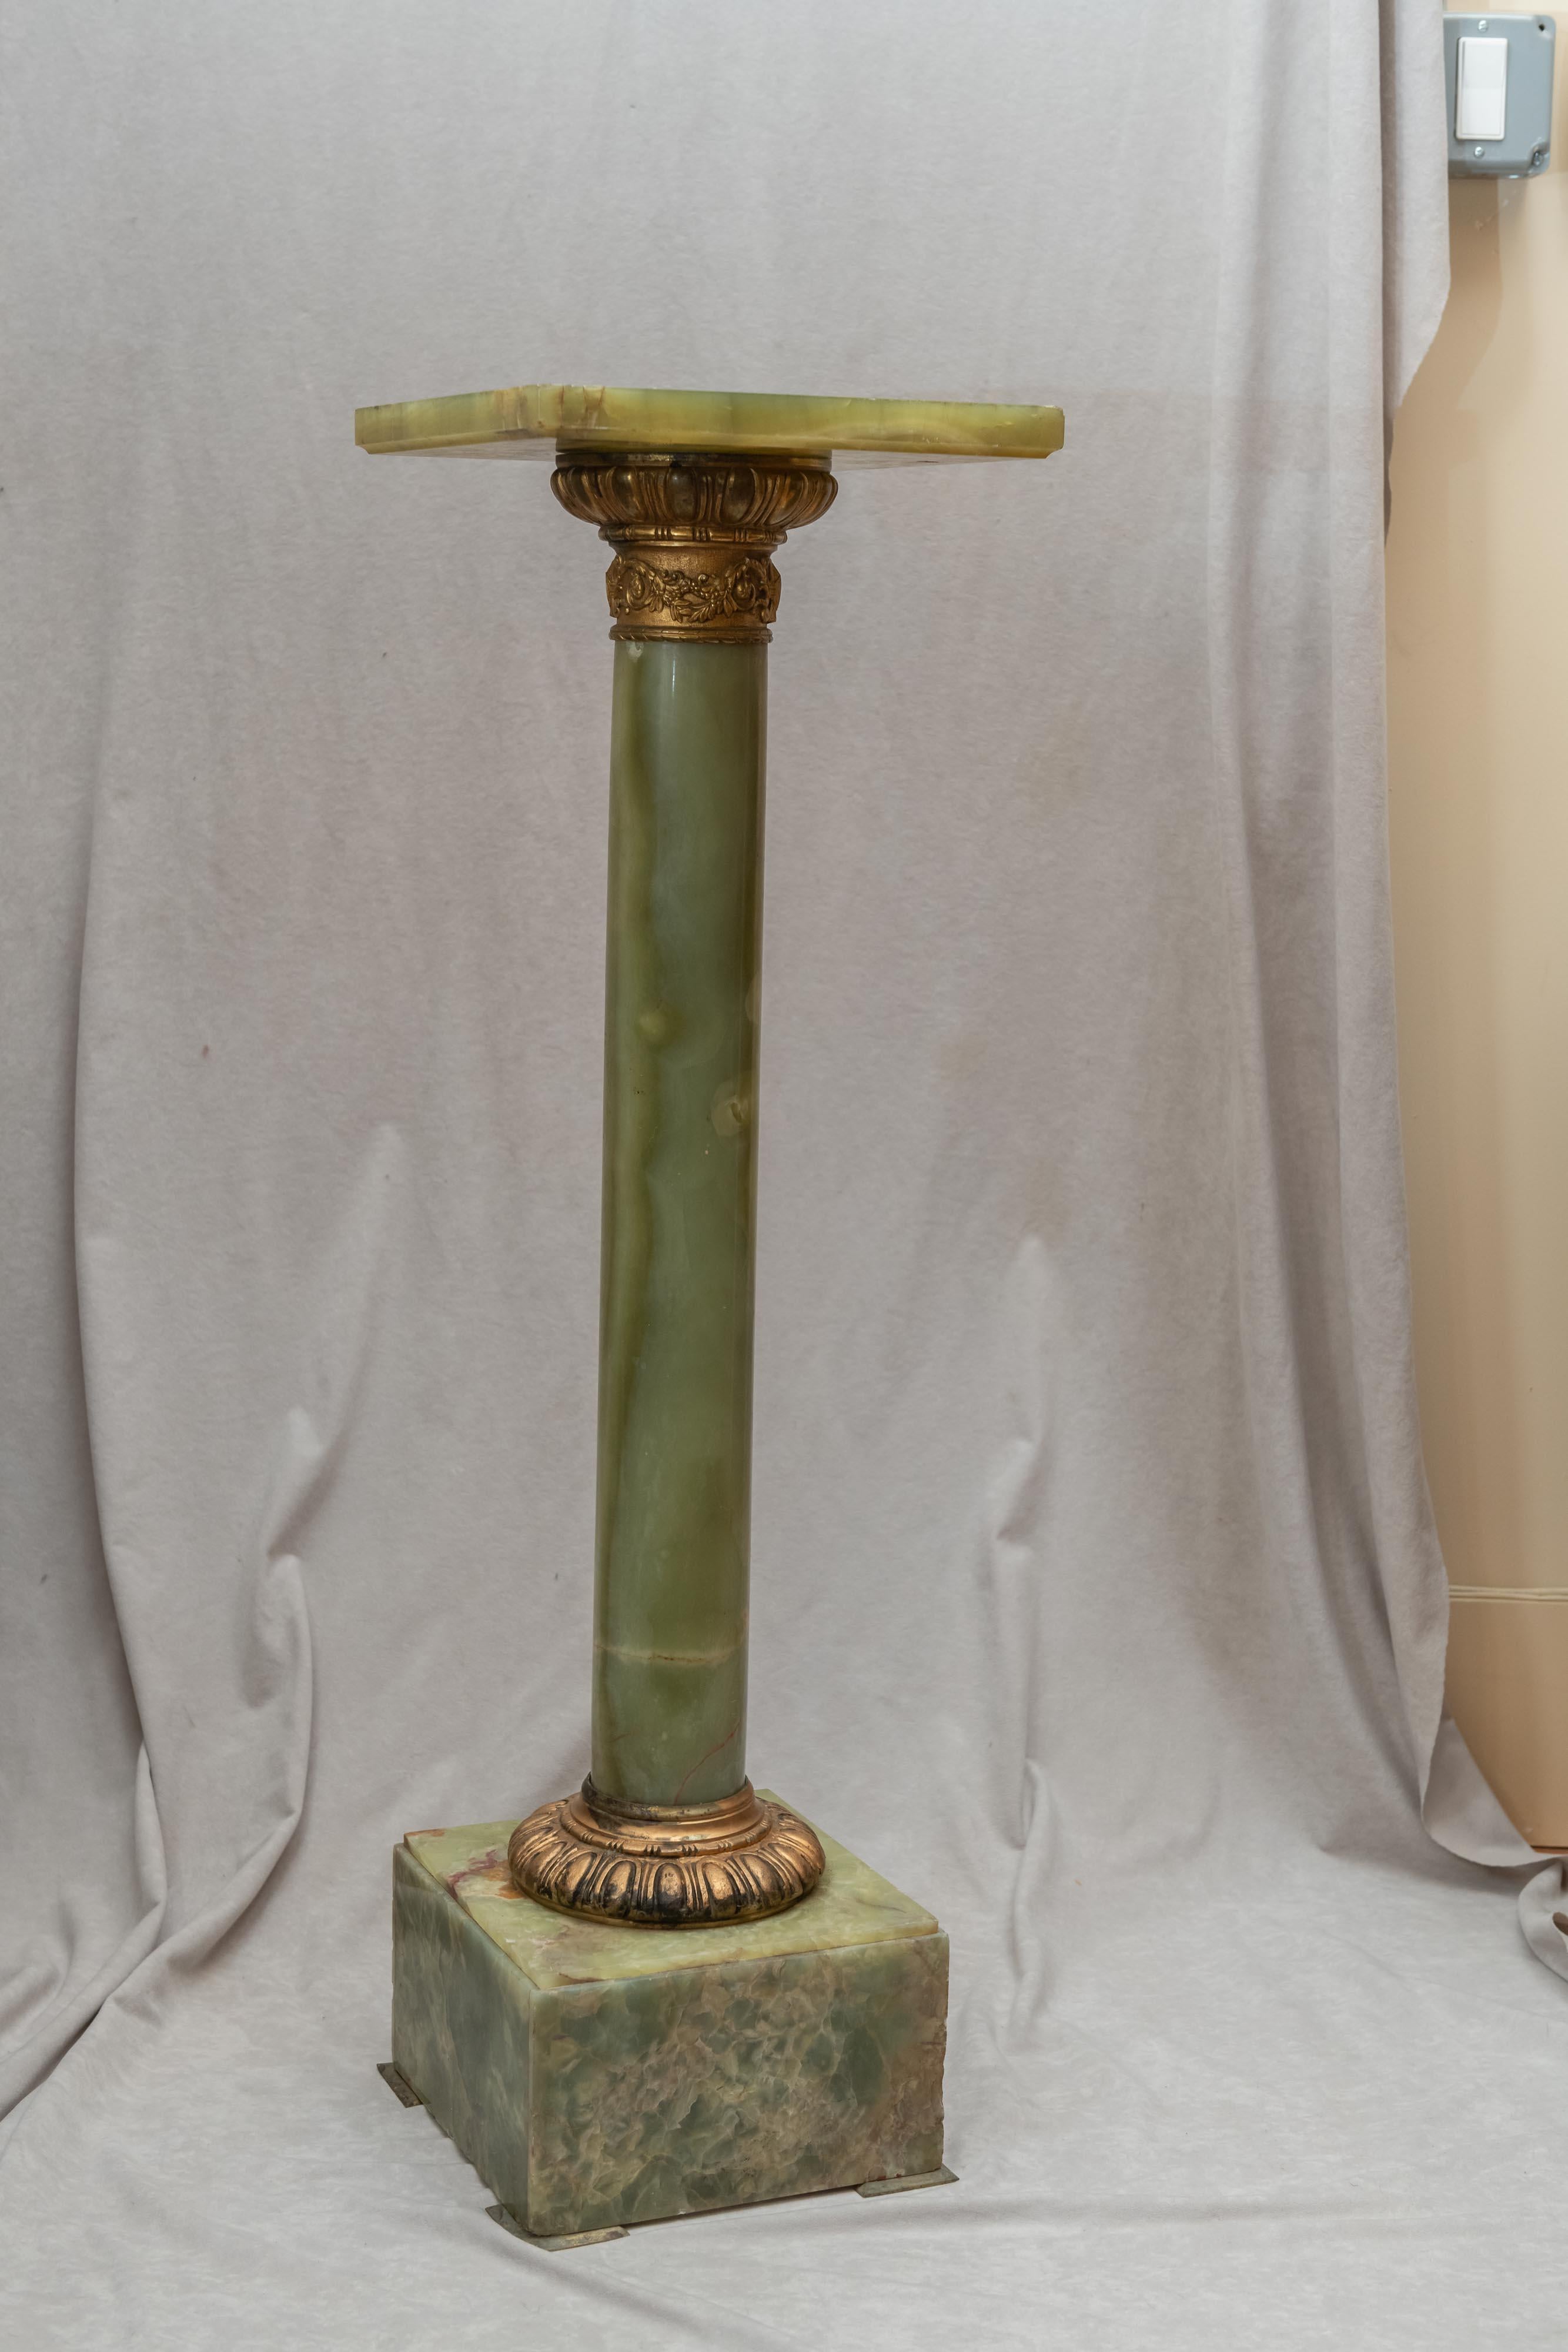 Colorful green onyx and rich gold ormolu make this a fine example of an antique pedestal. We believe it is Italian, circa 1900. If you are looking for a pedestal for a statue, vase, plant or whatever, this is a great option.